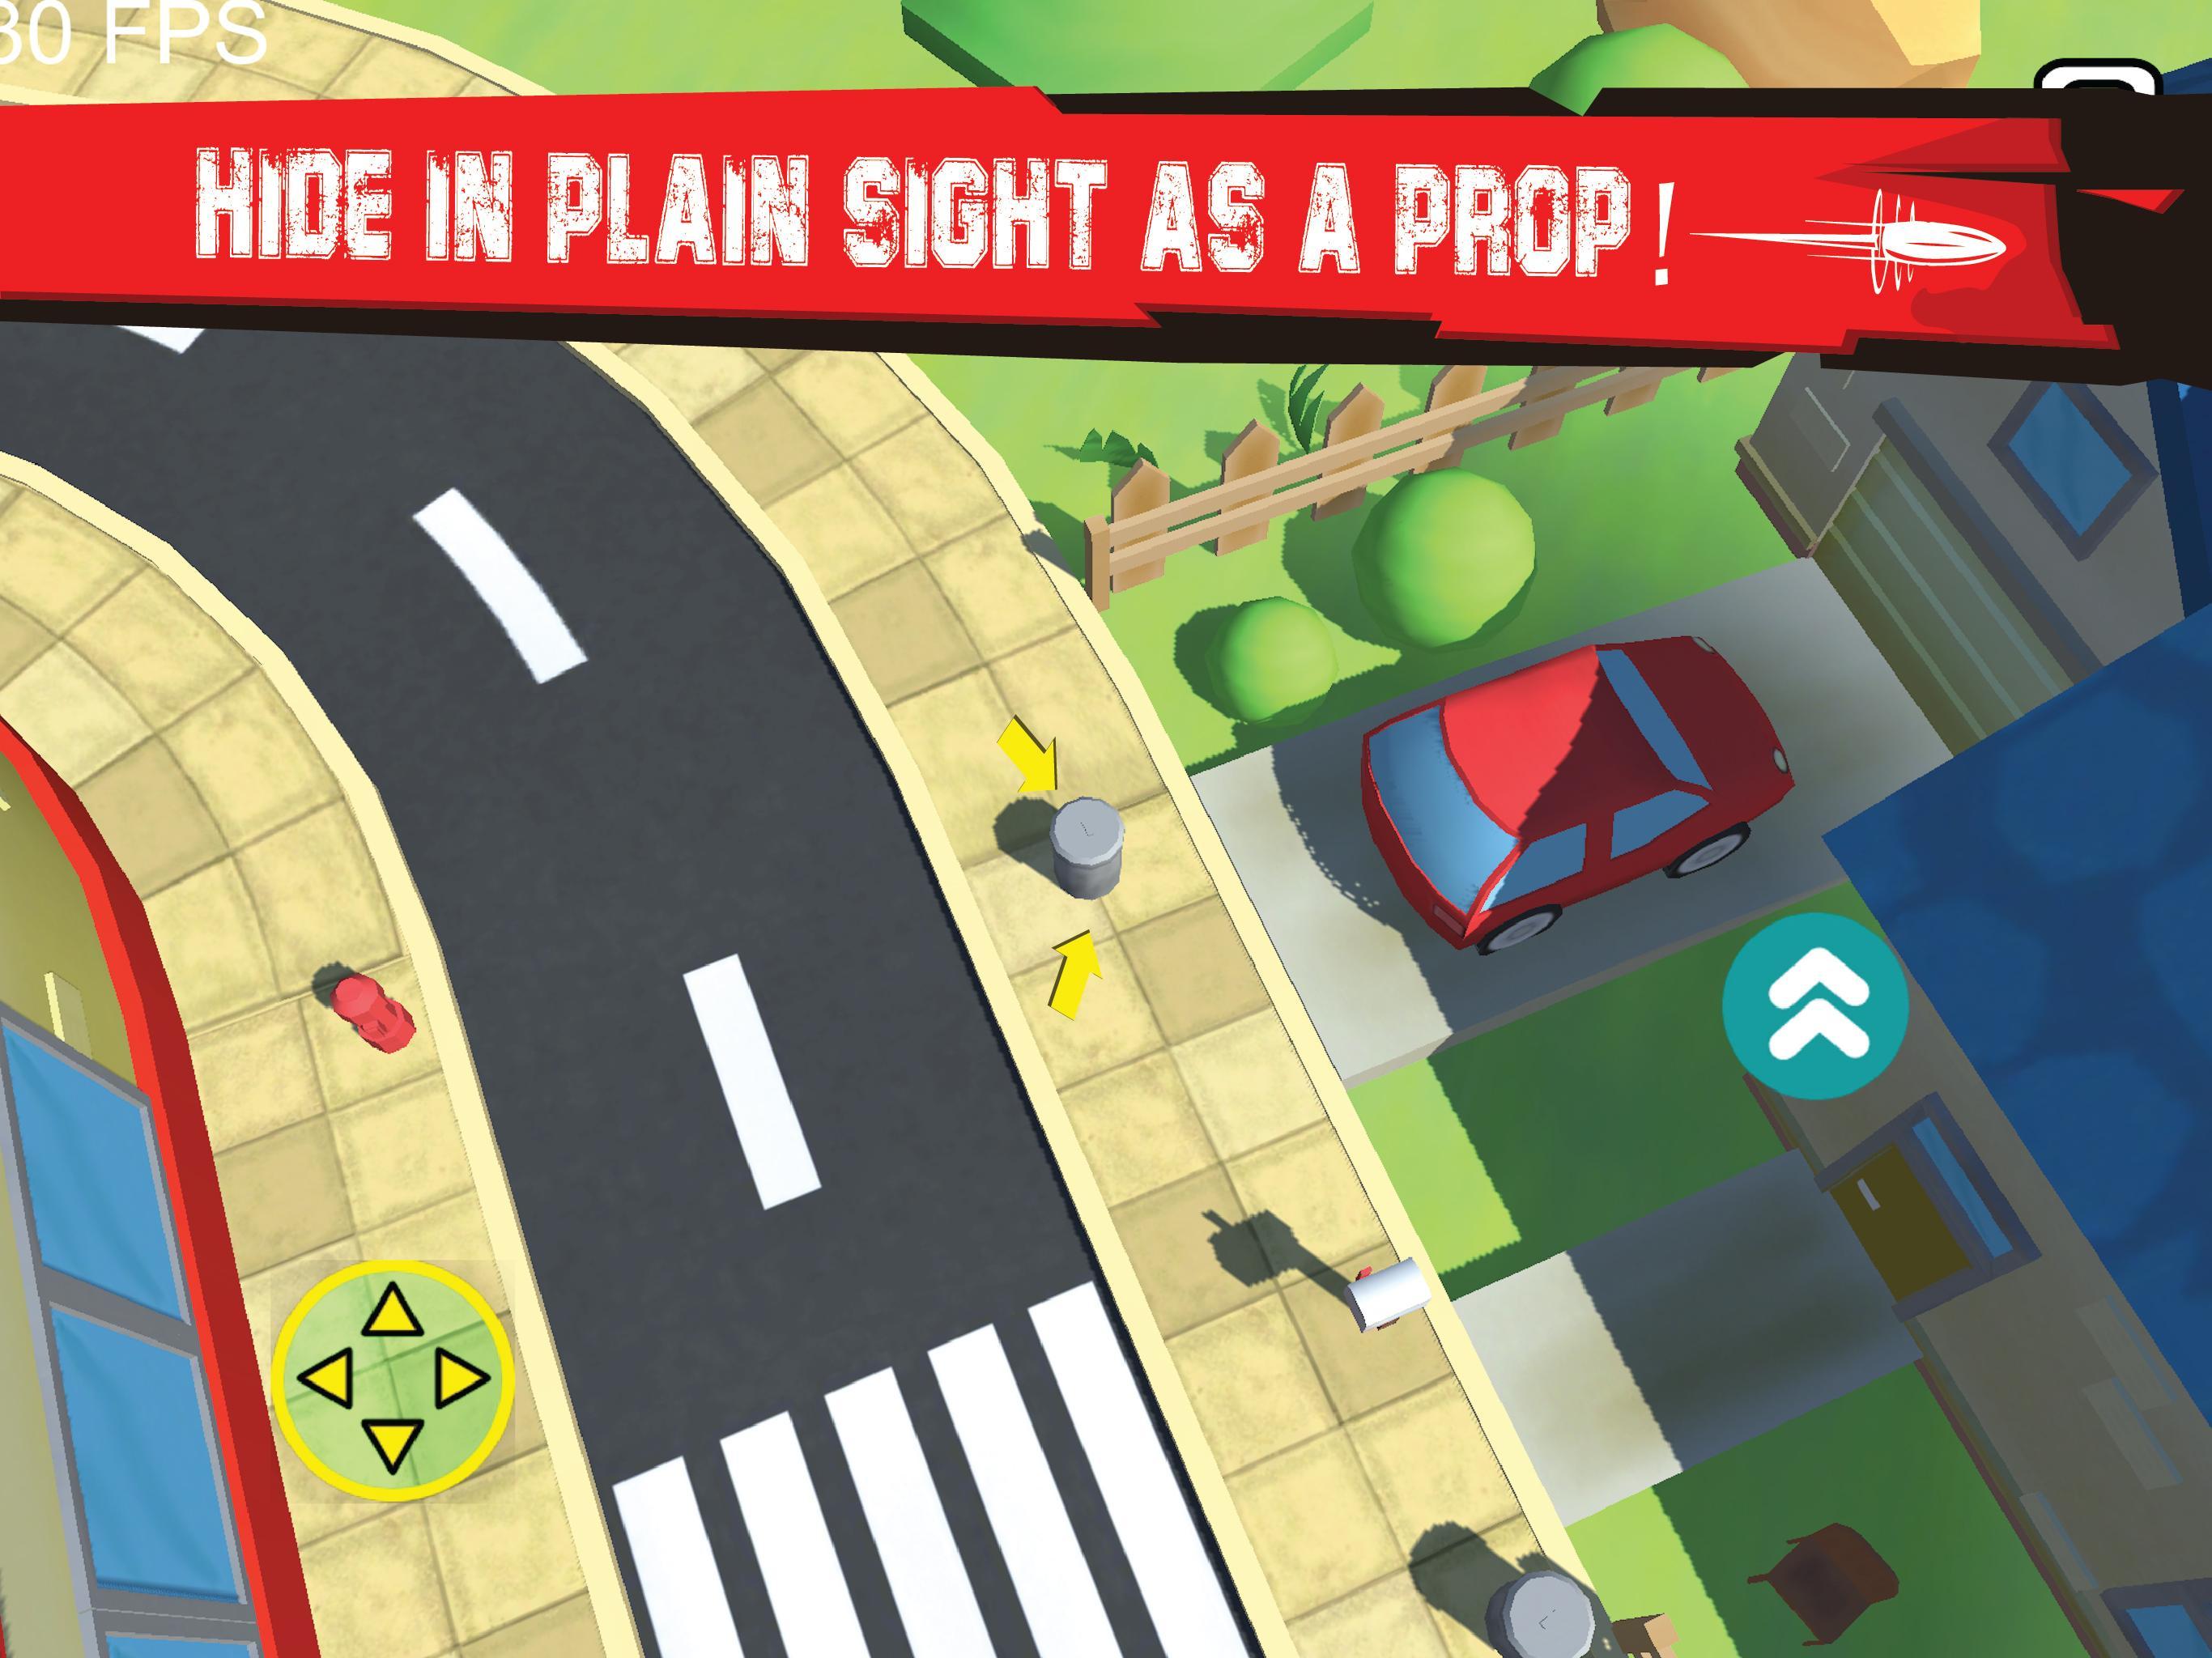 Hunt Props - Mobile TPS Shooter for Android - APK Download - 